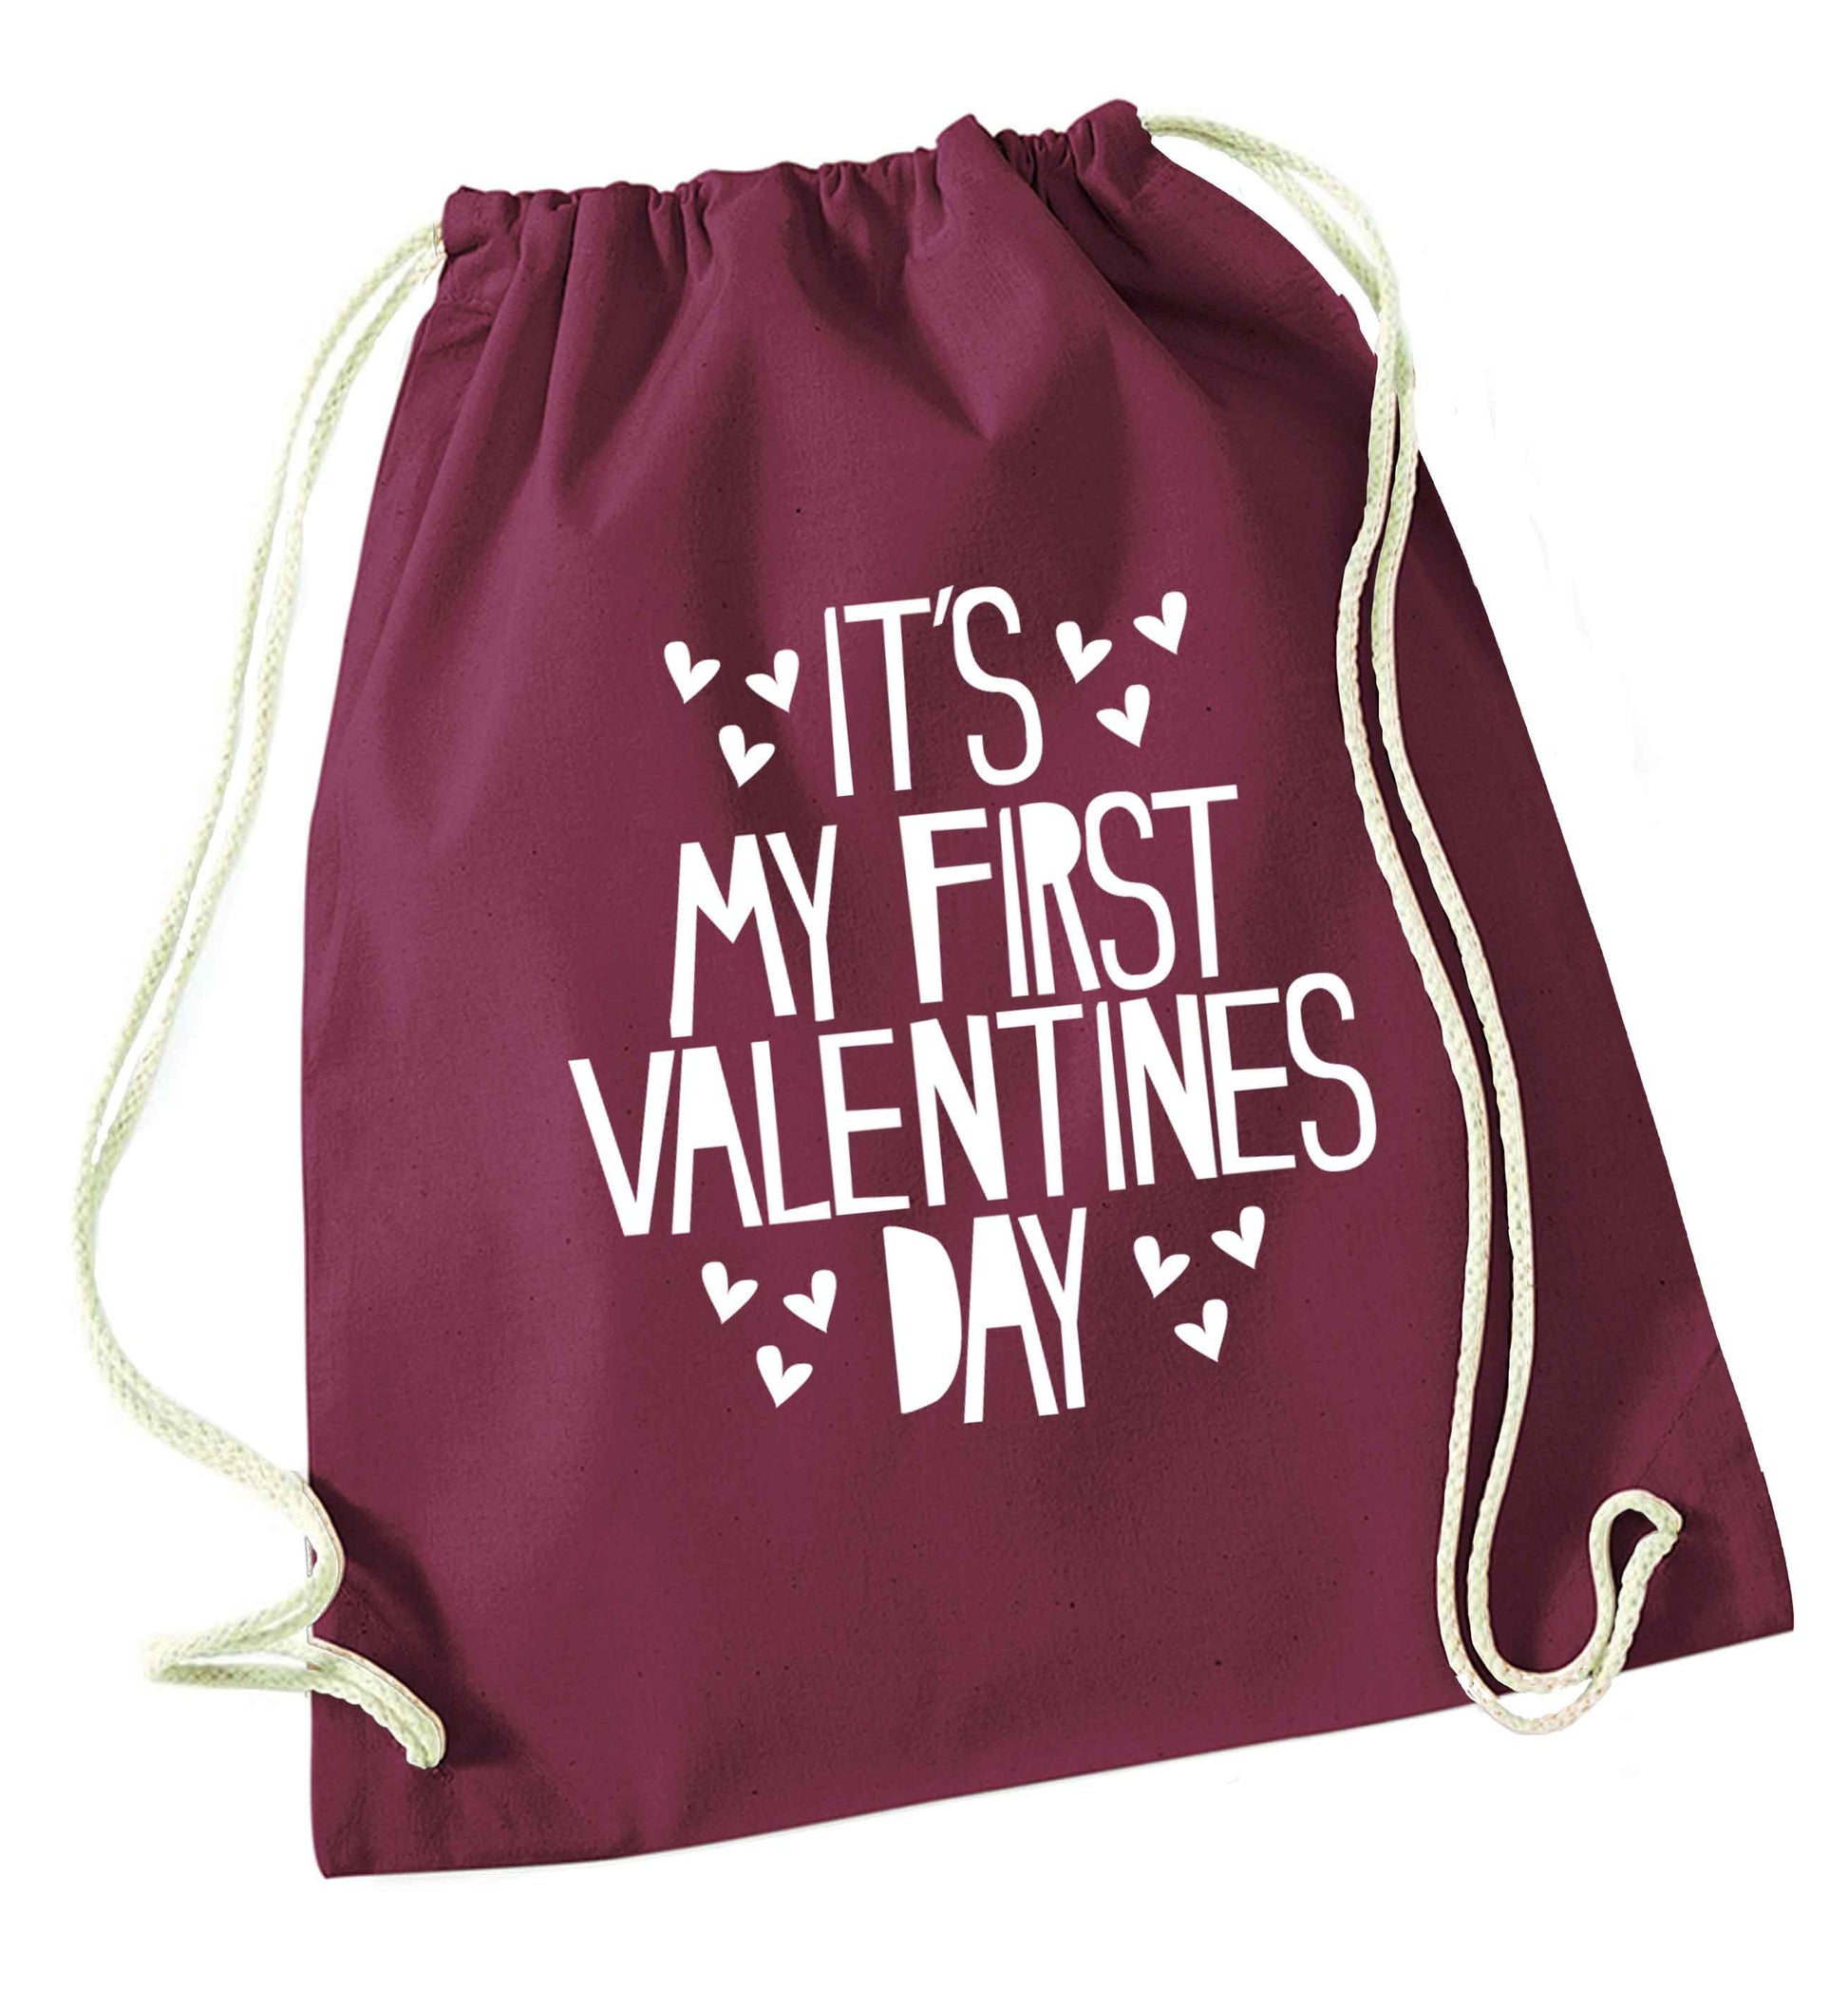 Hearts It's my First Valentine's Day maroon drawstring bag